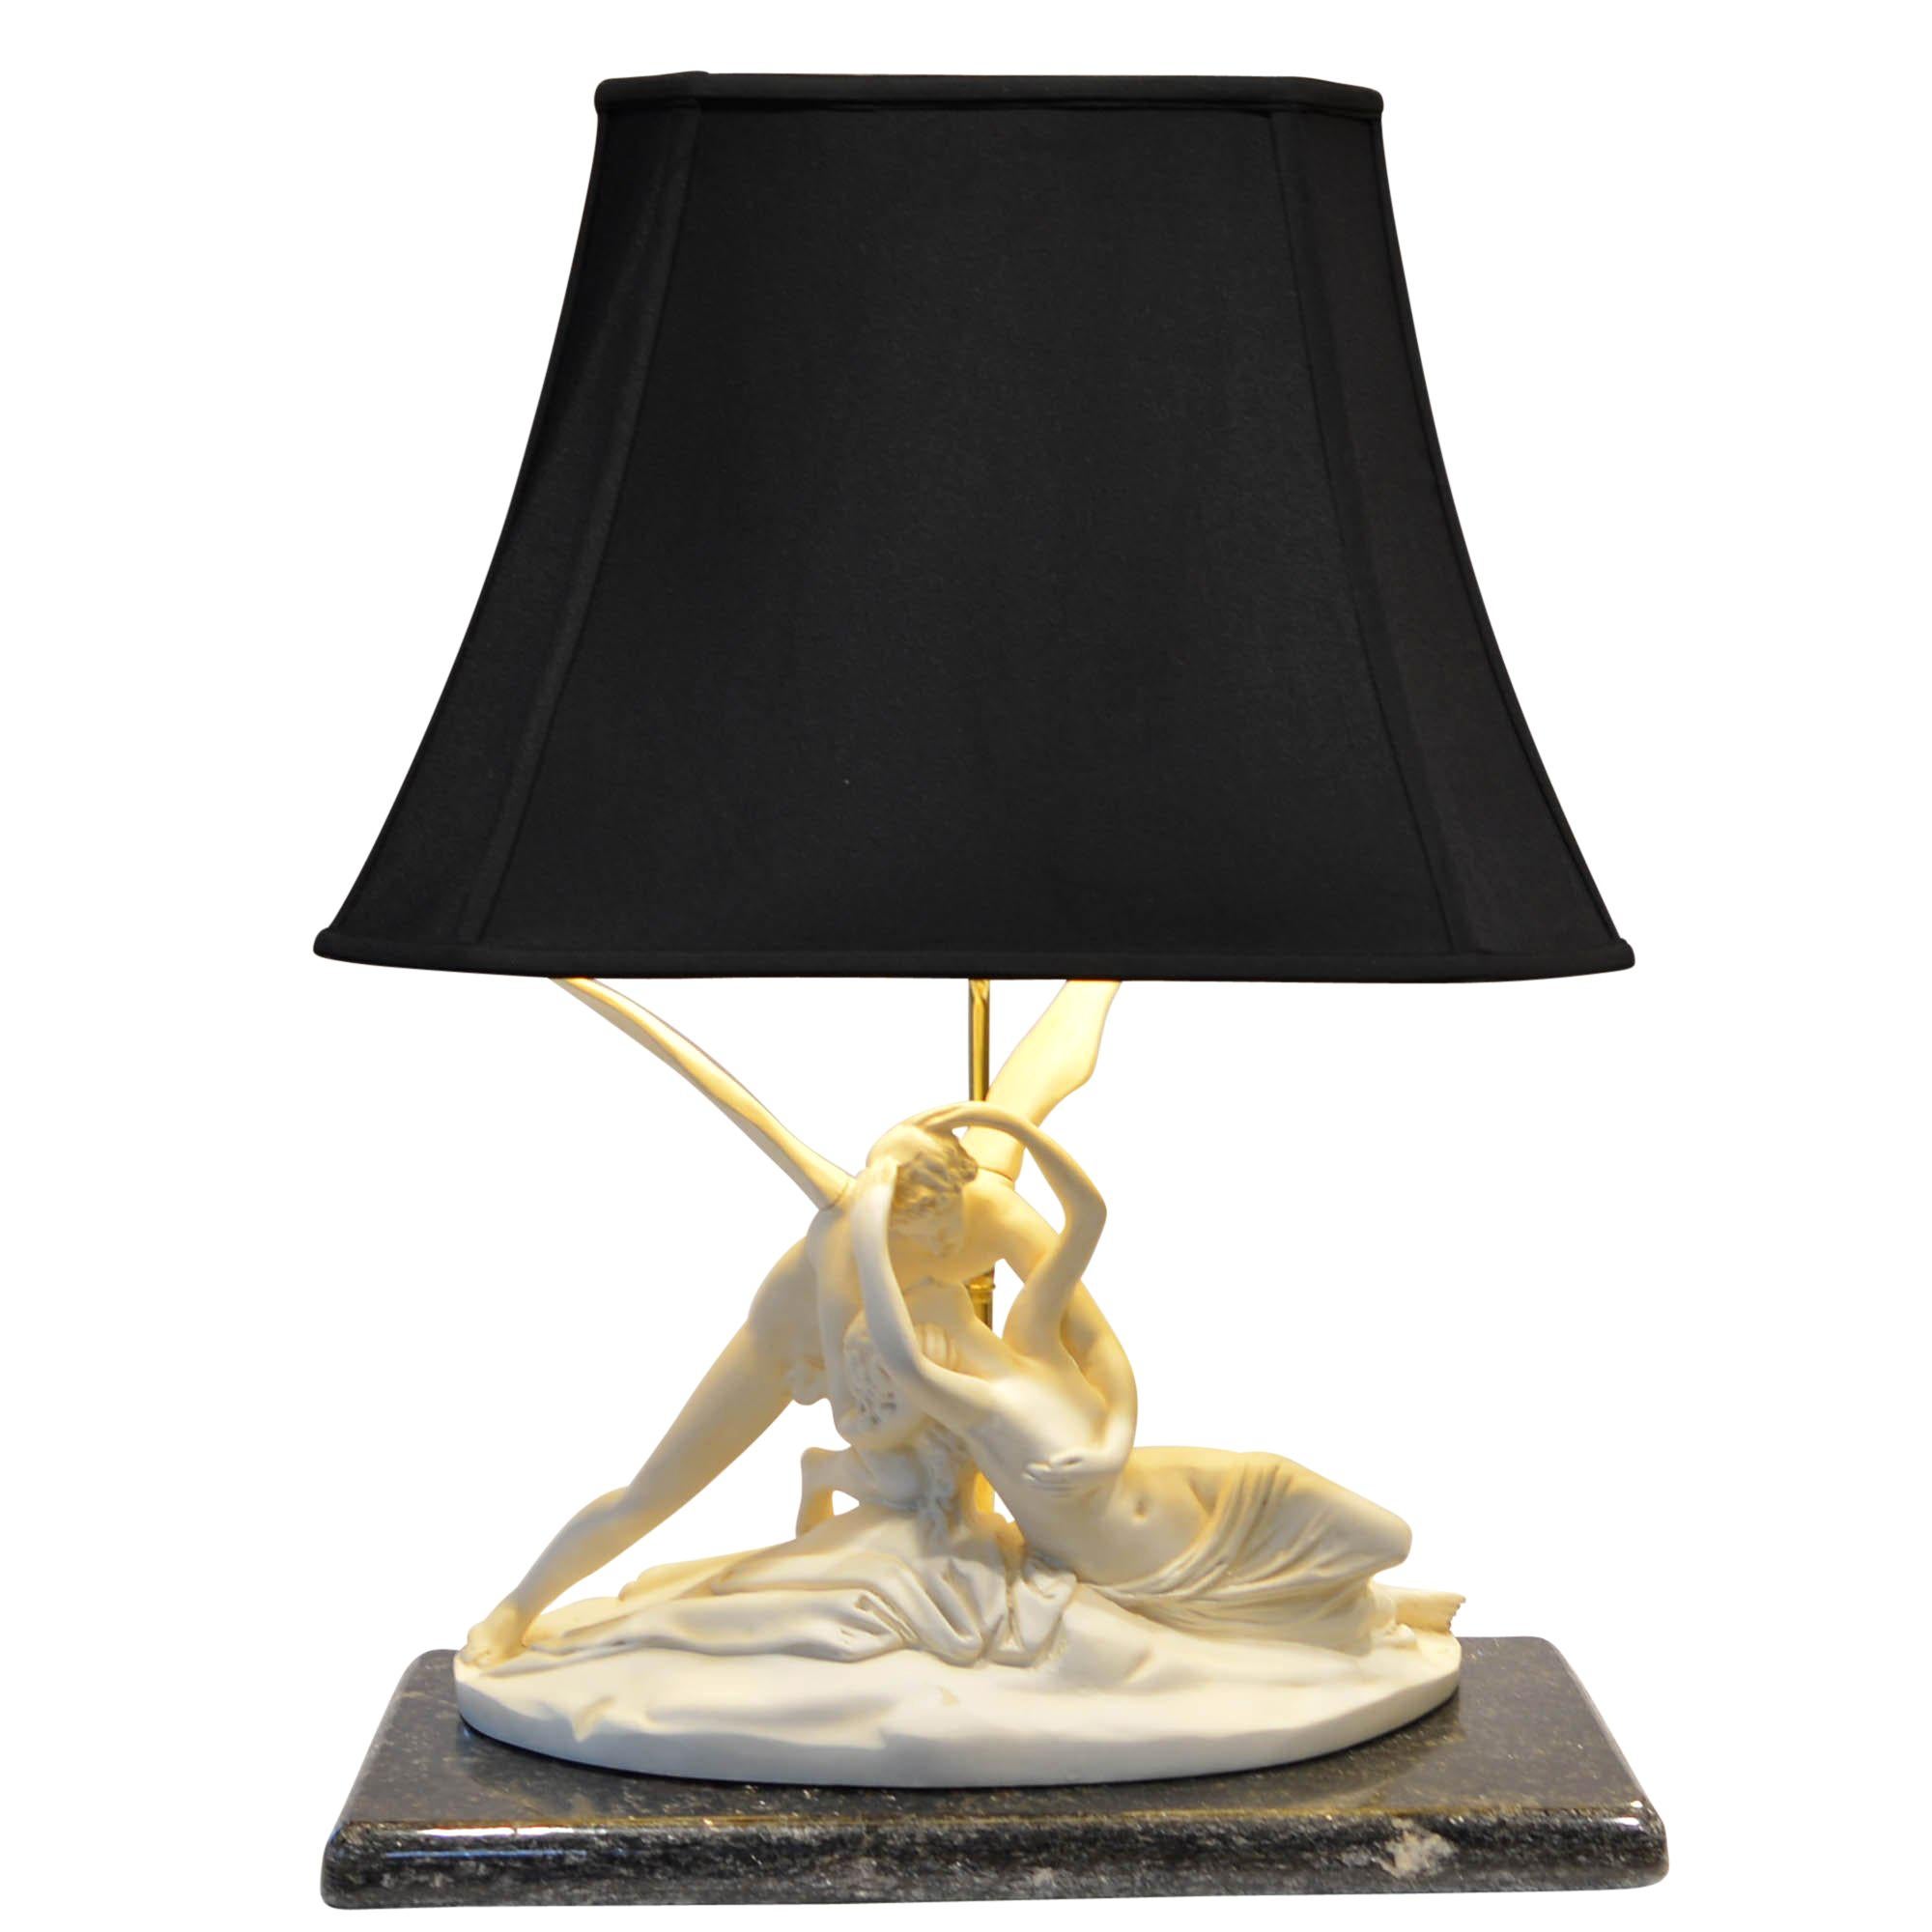 Psyche Revived by Cupid's Kiss Lamp on Marble Base Black Shade Gold Lining